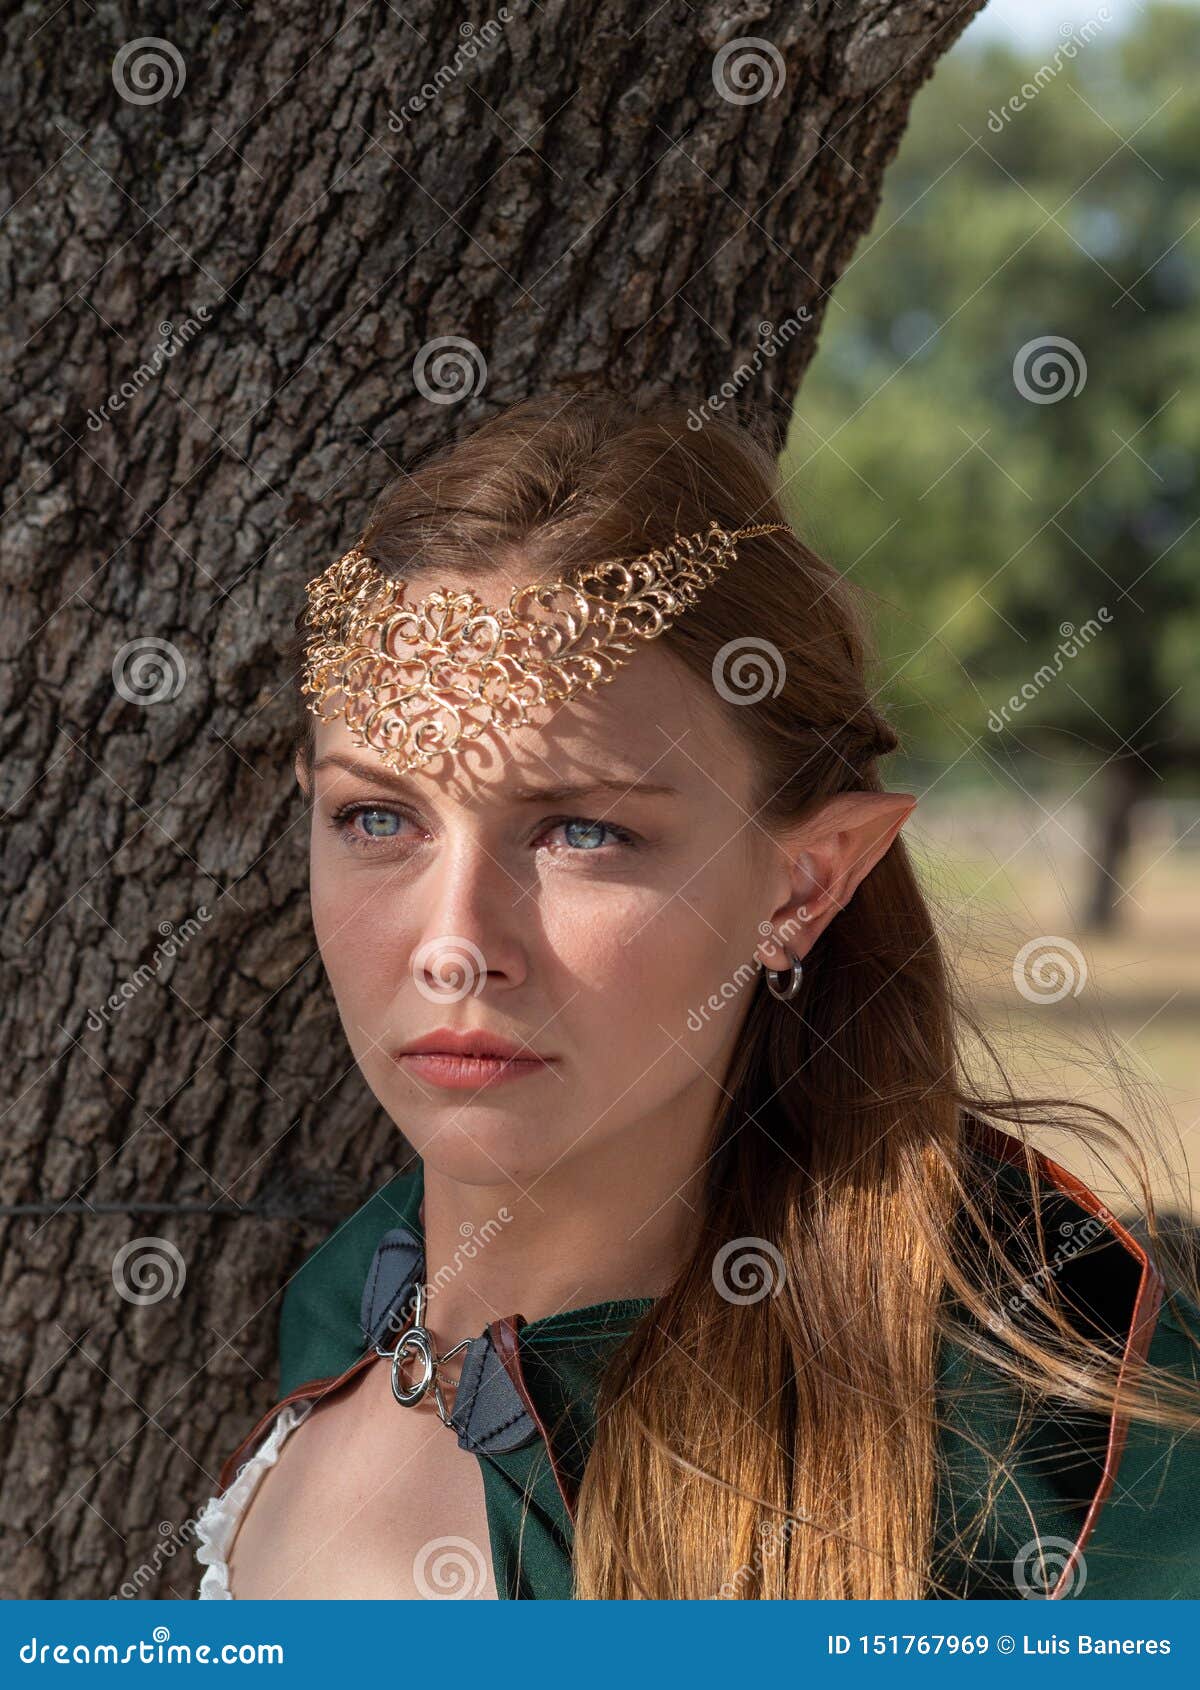 Close Up Of Blonde Girl With Blue Eyes And Elf Ears Wearing